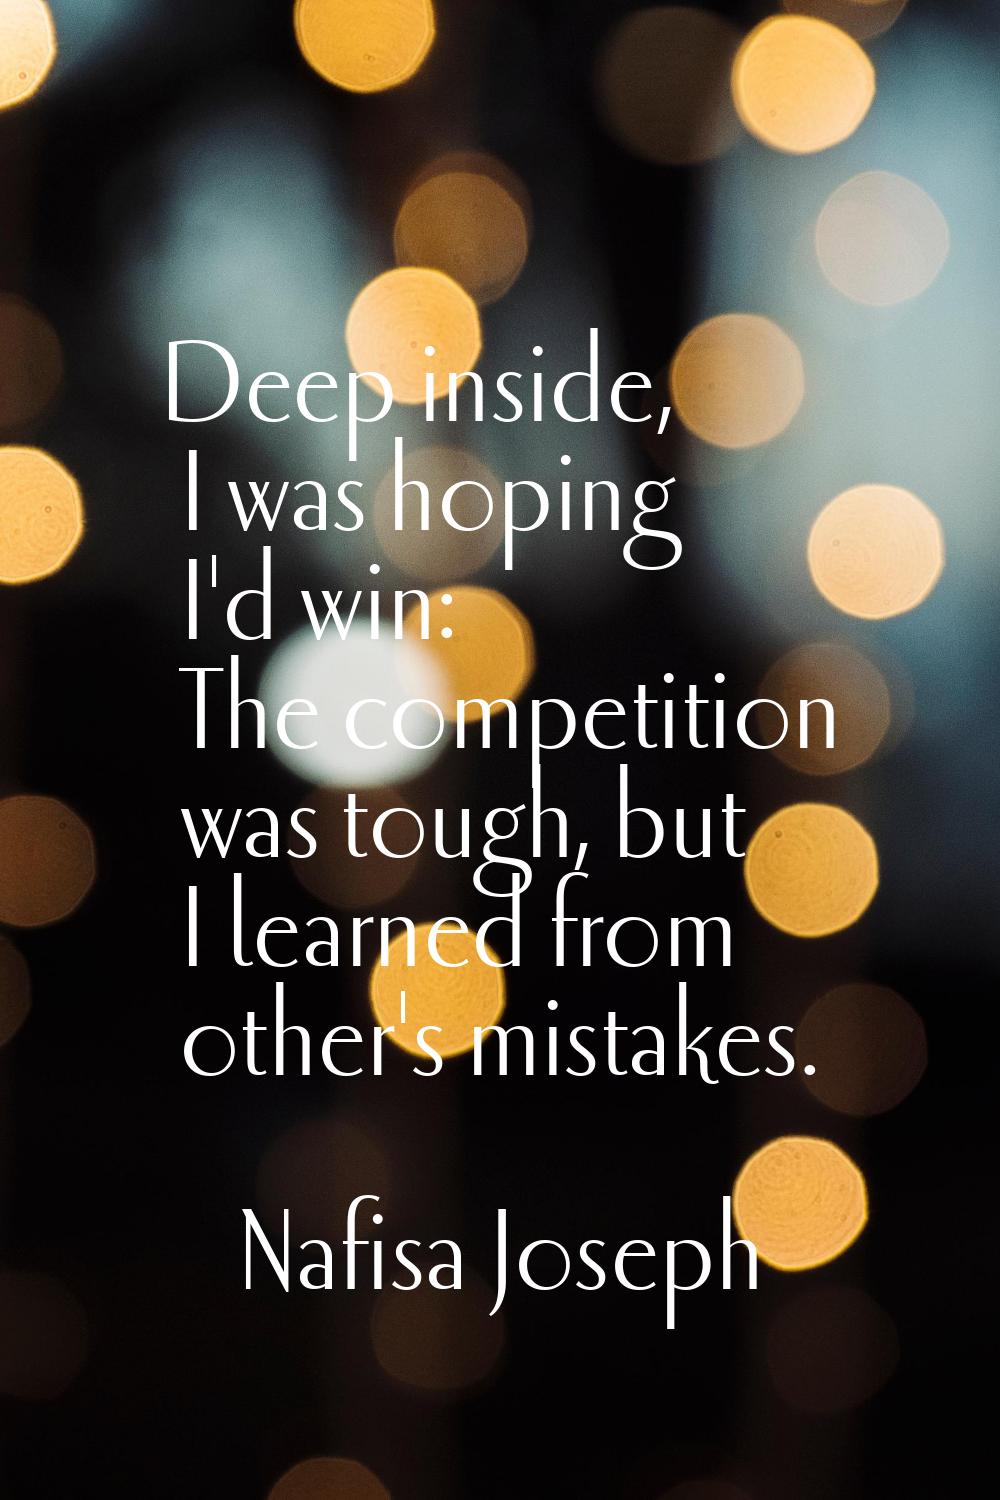 Deep inside, I was hoping I'd win: The competition was tough, but I learned from other's mistakes.